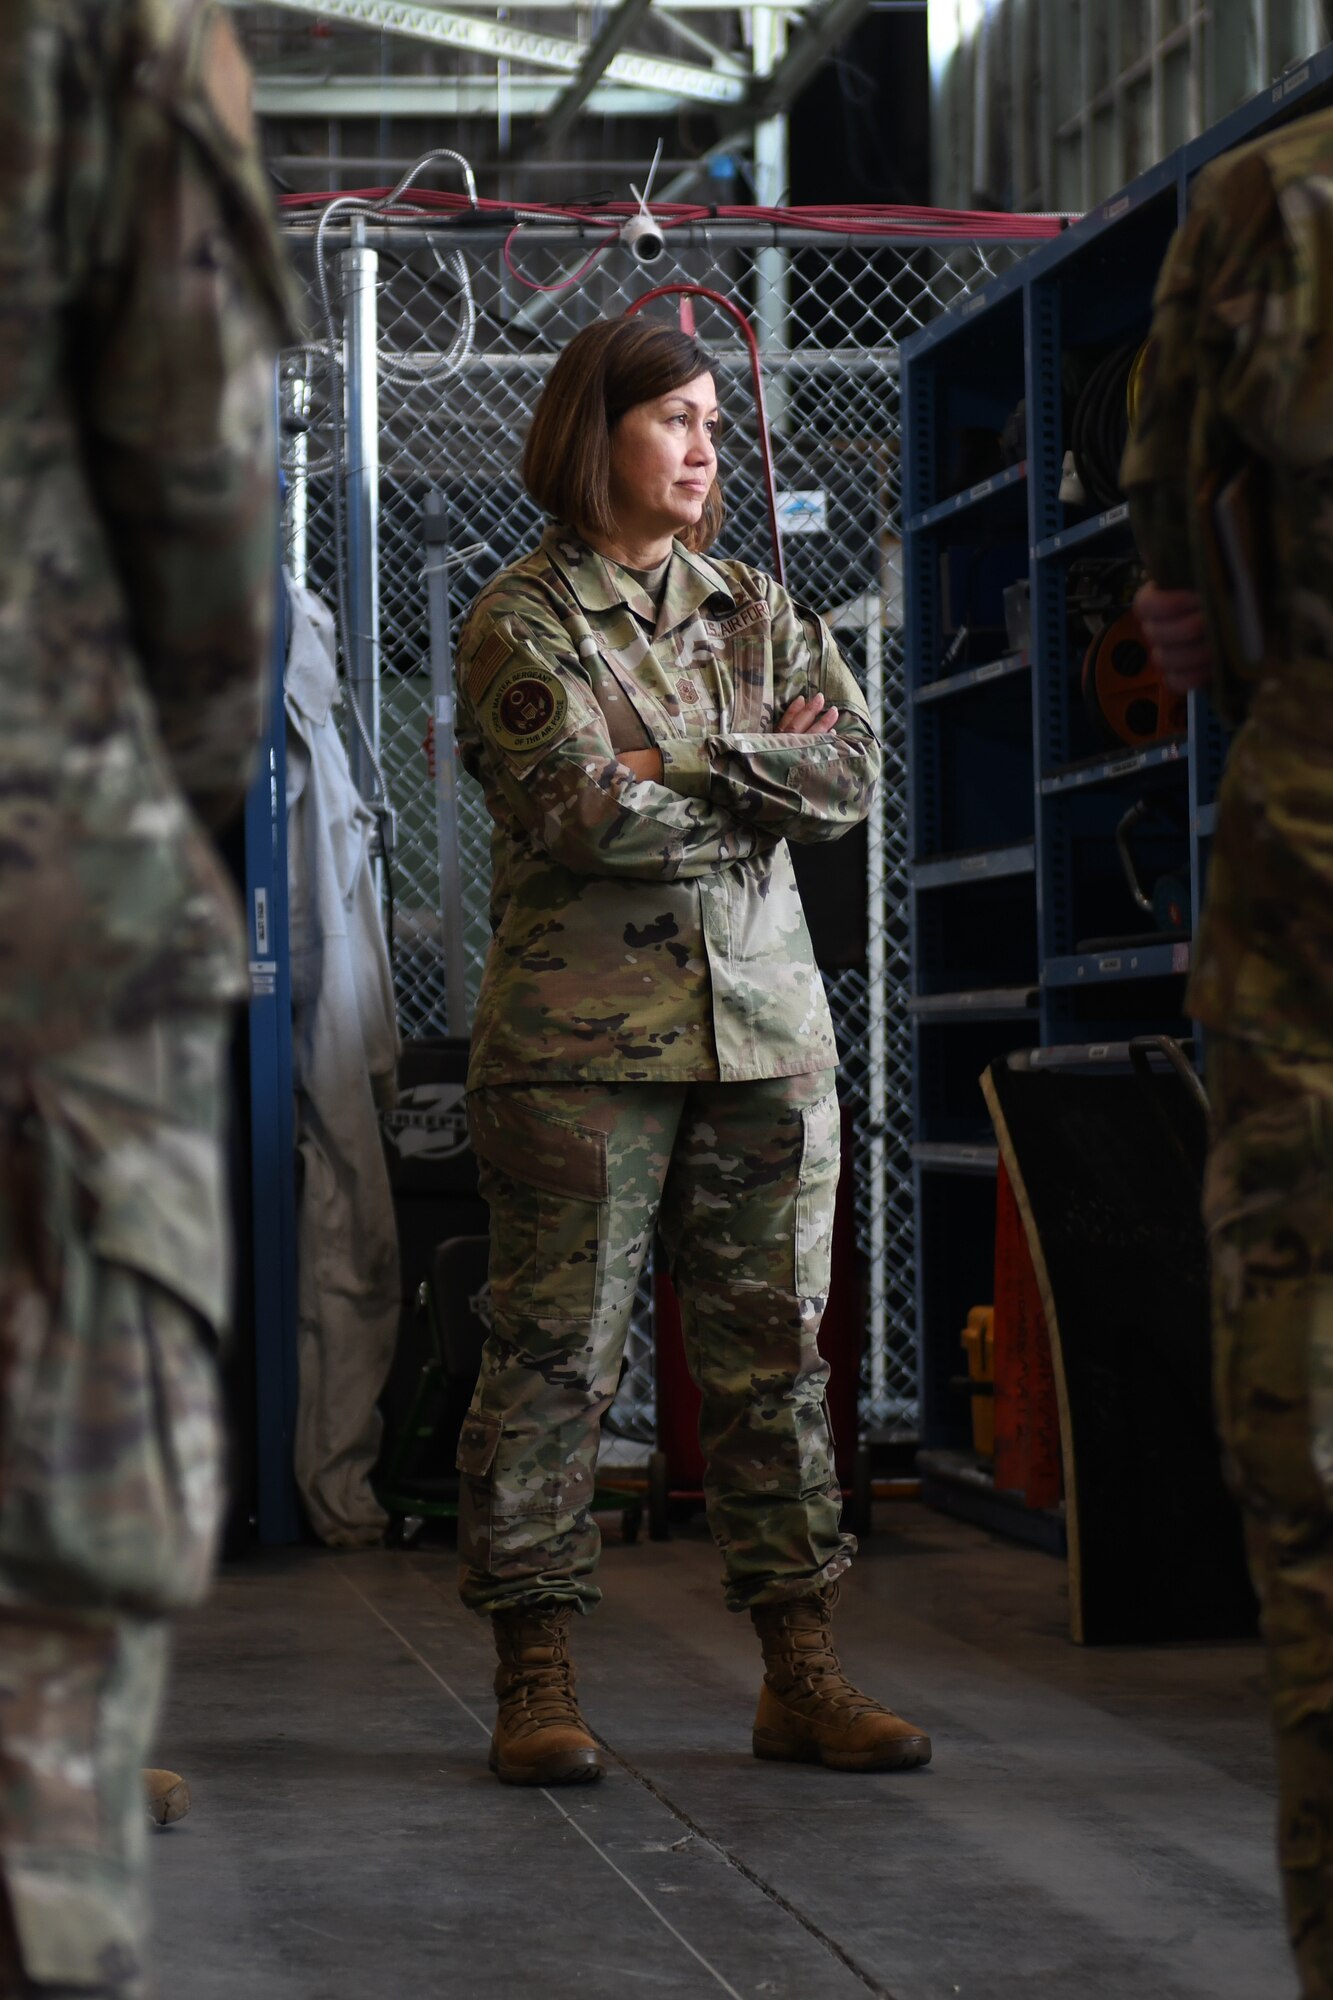 Chief Master Sergeant of the Air Force JoAnne S. Bass stands with her arms crossed.